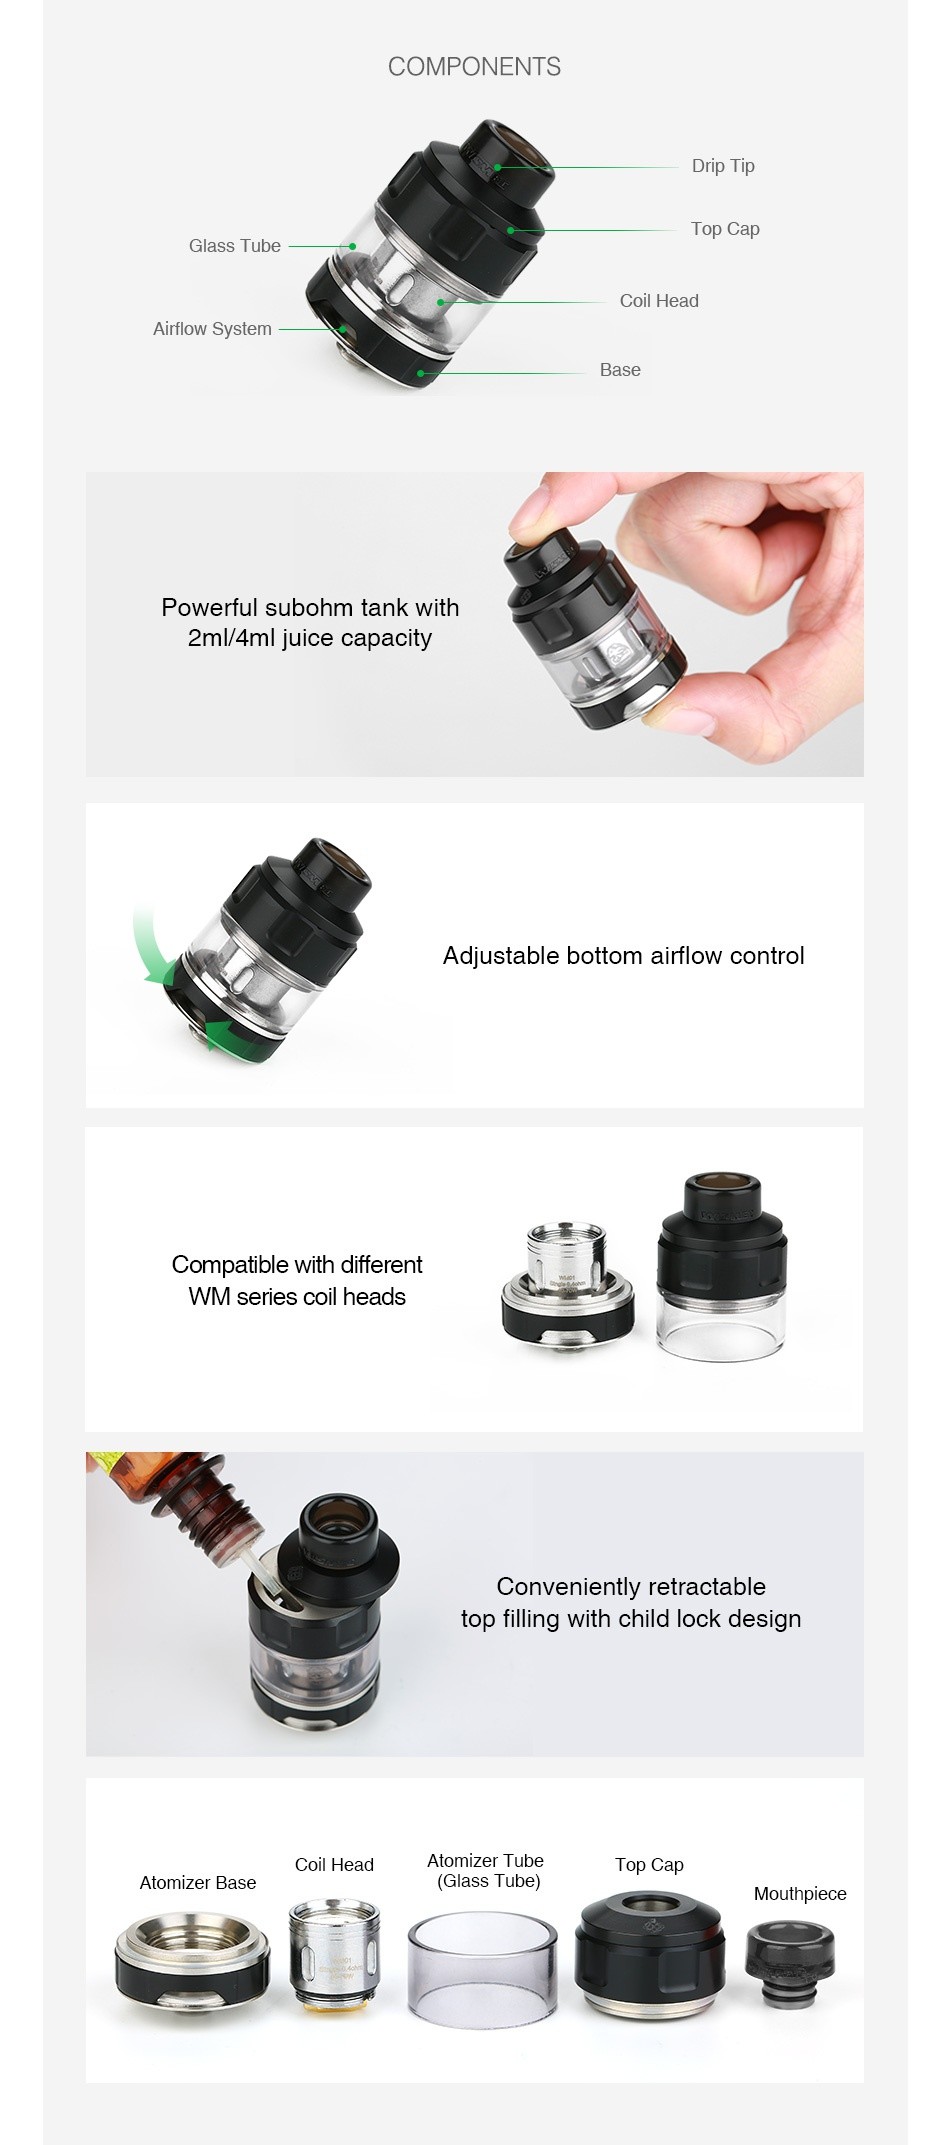 WISMEC Gnome Evo Subohm Tank 4ml/2ml OMPONENTS rip I ip Glass Tube Airflow System Bas Powerful subohm tank with 2ml 4ml juice capacity Adjustable bottom airflow control Compatible with different WM series coil heads C iently retractable top filling with child lock design Coil head Aorn  er Tube Top Cap Aorn  er base  Glass Tube  Mouthpiece